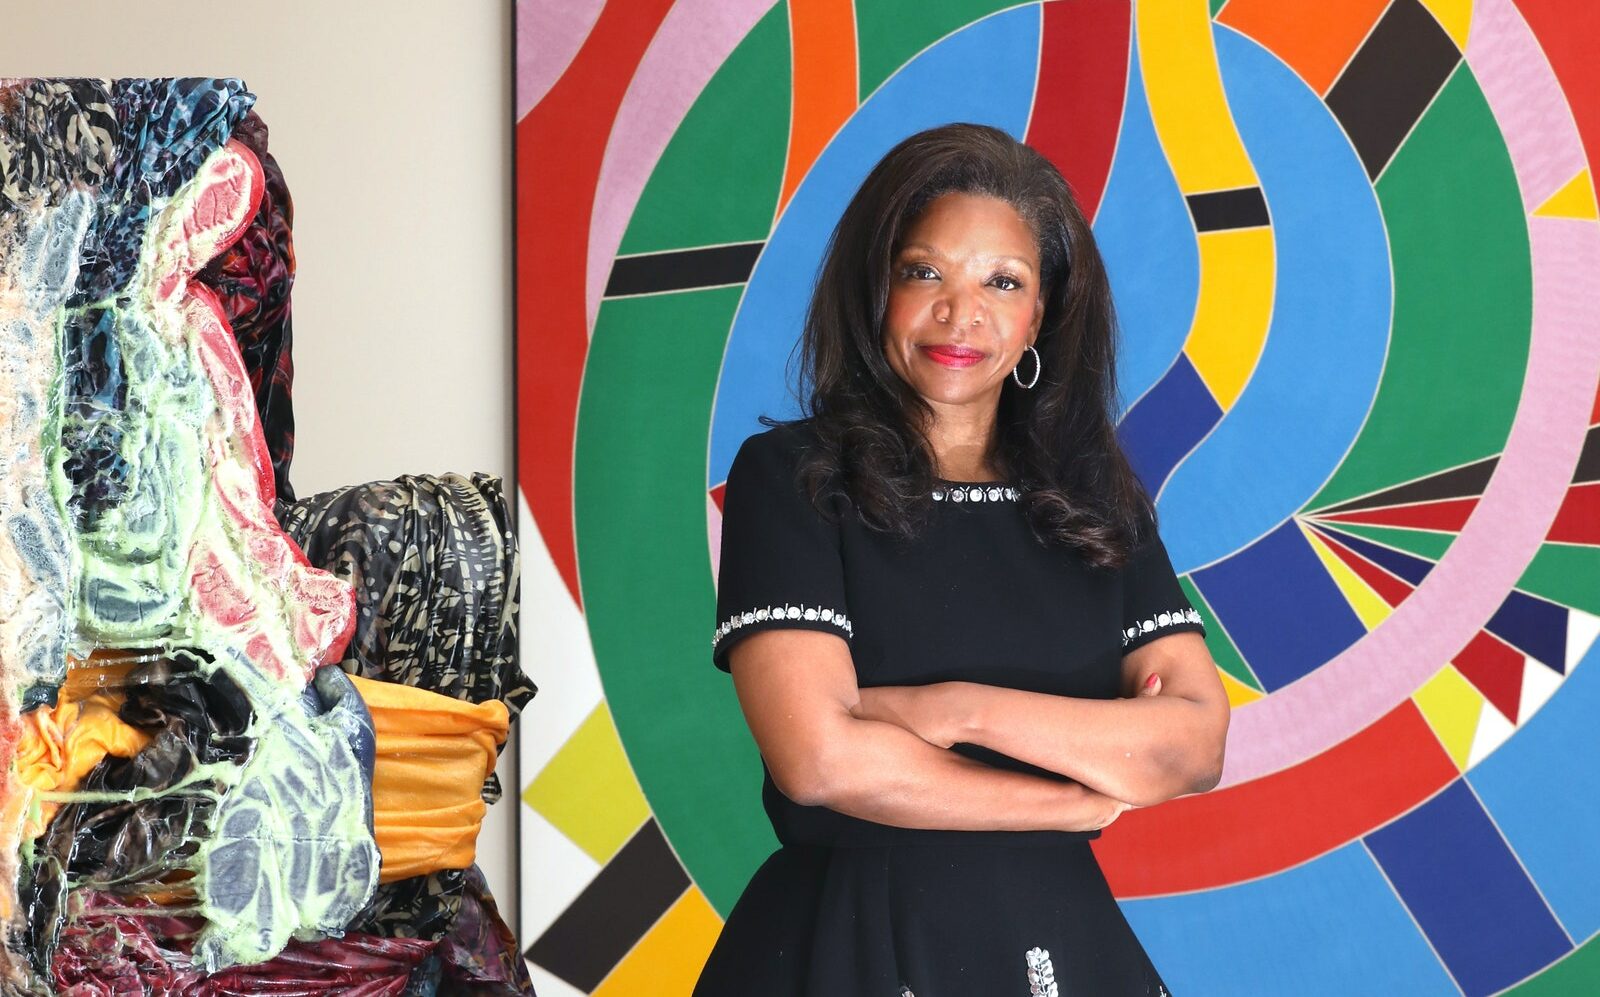 Joyner in 2019, pictured with a sculpture from Kevin Beasley called Aurora, 2018. At right is a painting Eastern Star, 1971, from William T. Williams.